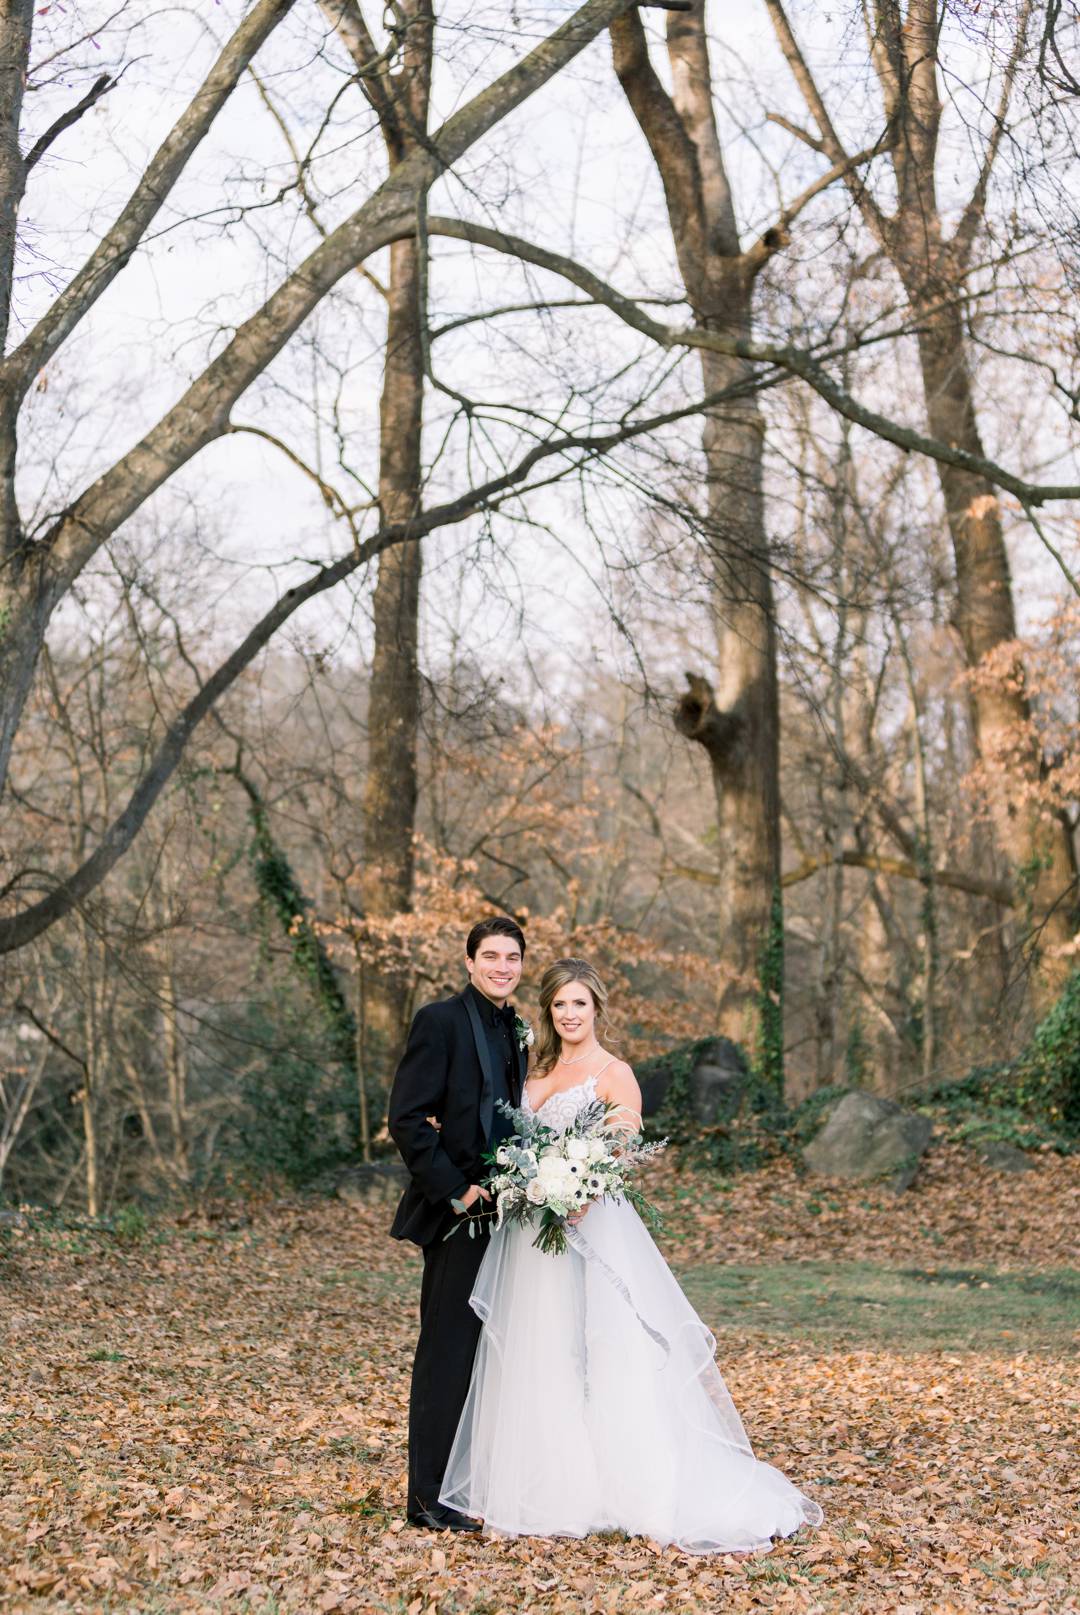 Bride and Groom formals outdoors at American Spirt Works. NYE wedding at the Stave Room by Atlanta wedding photographer Leigh Wolfe Photography.